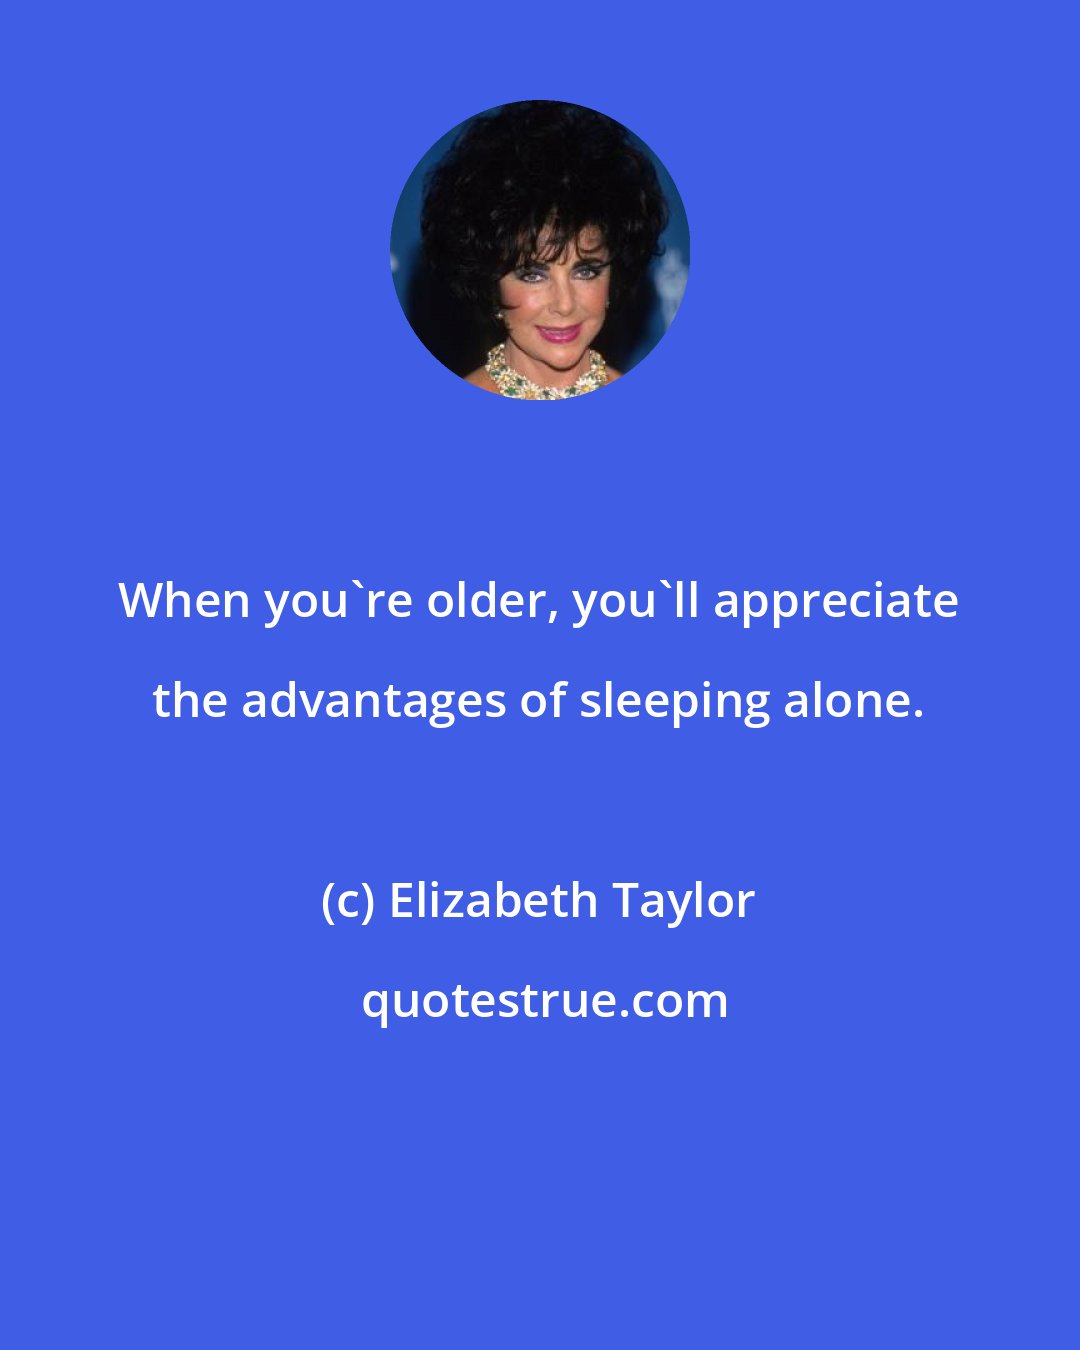 Elizabeth Taylor: When you're older, you'll appreciate the advantages of sleeping alone.